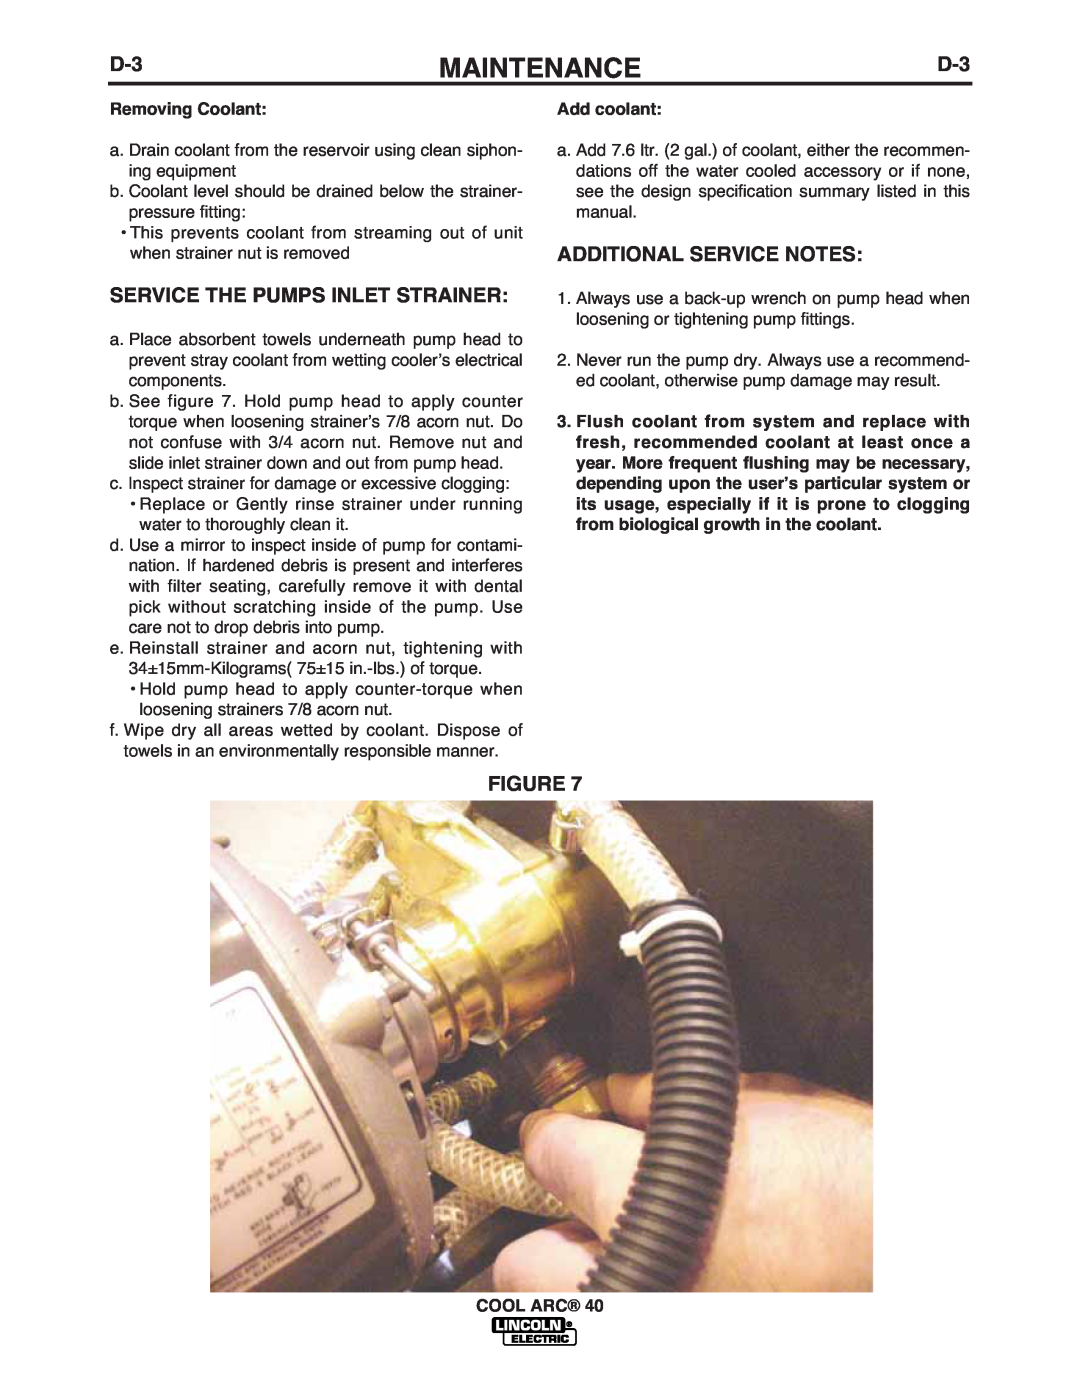 Lincoln Electric IM670-A manual Maintenance, Removing Coolant, Add coolant, Cool Arc 